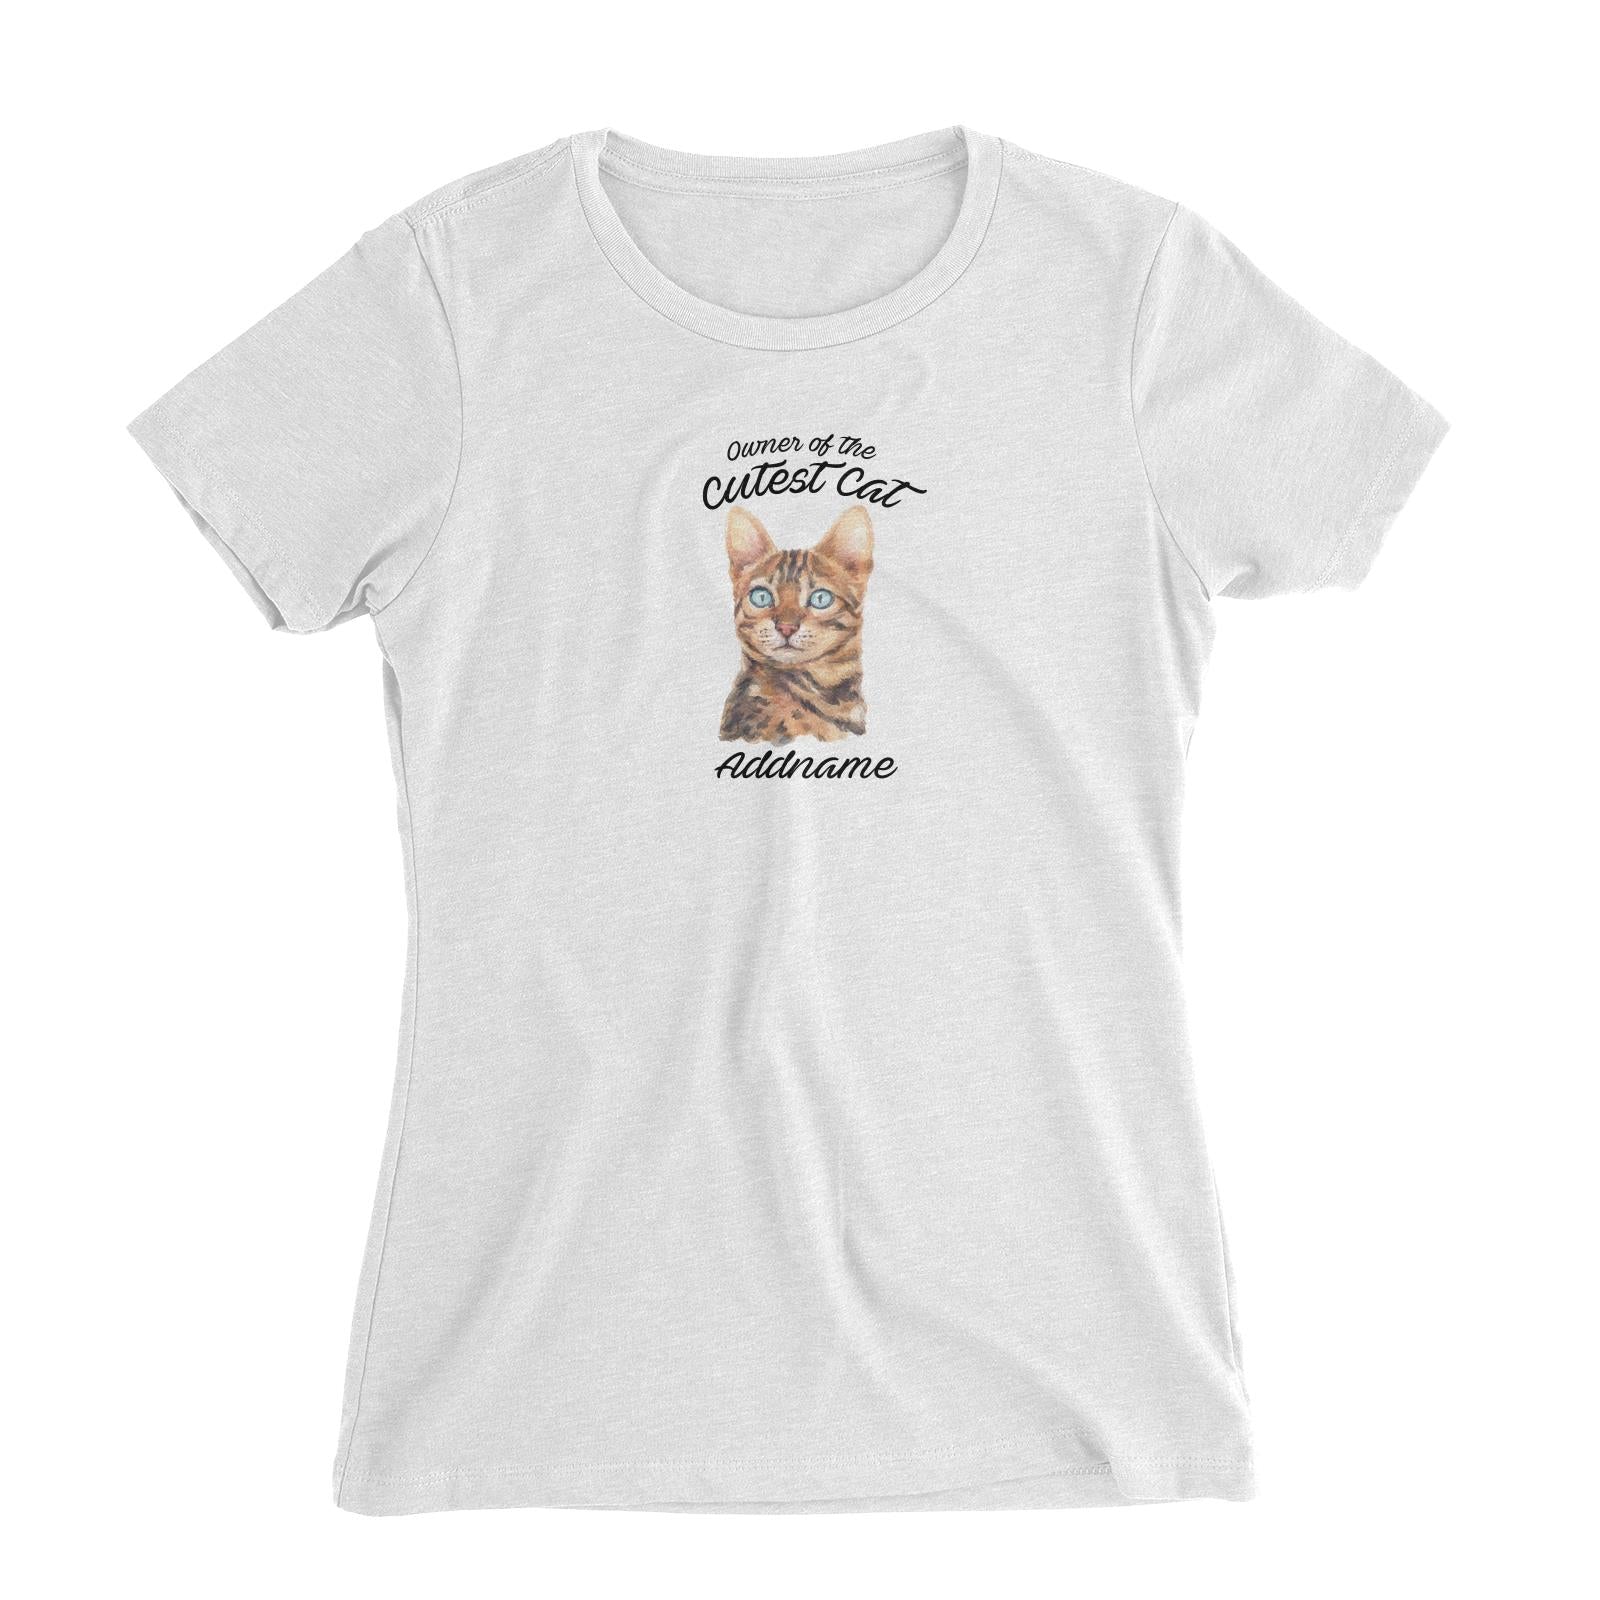 Watercolor Owner Of The Cutest Cat Bengal Addname Women's Slim Fit T-Shirt